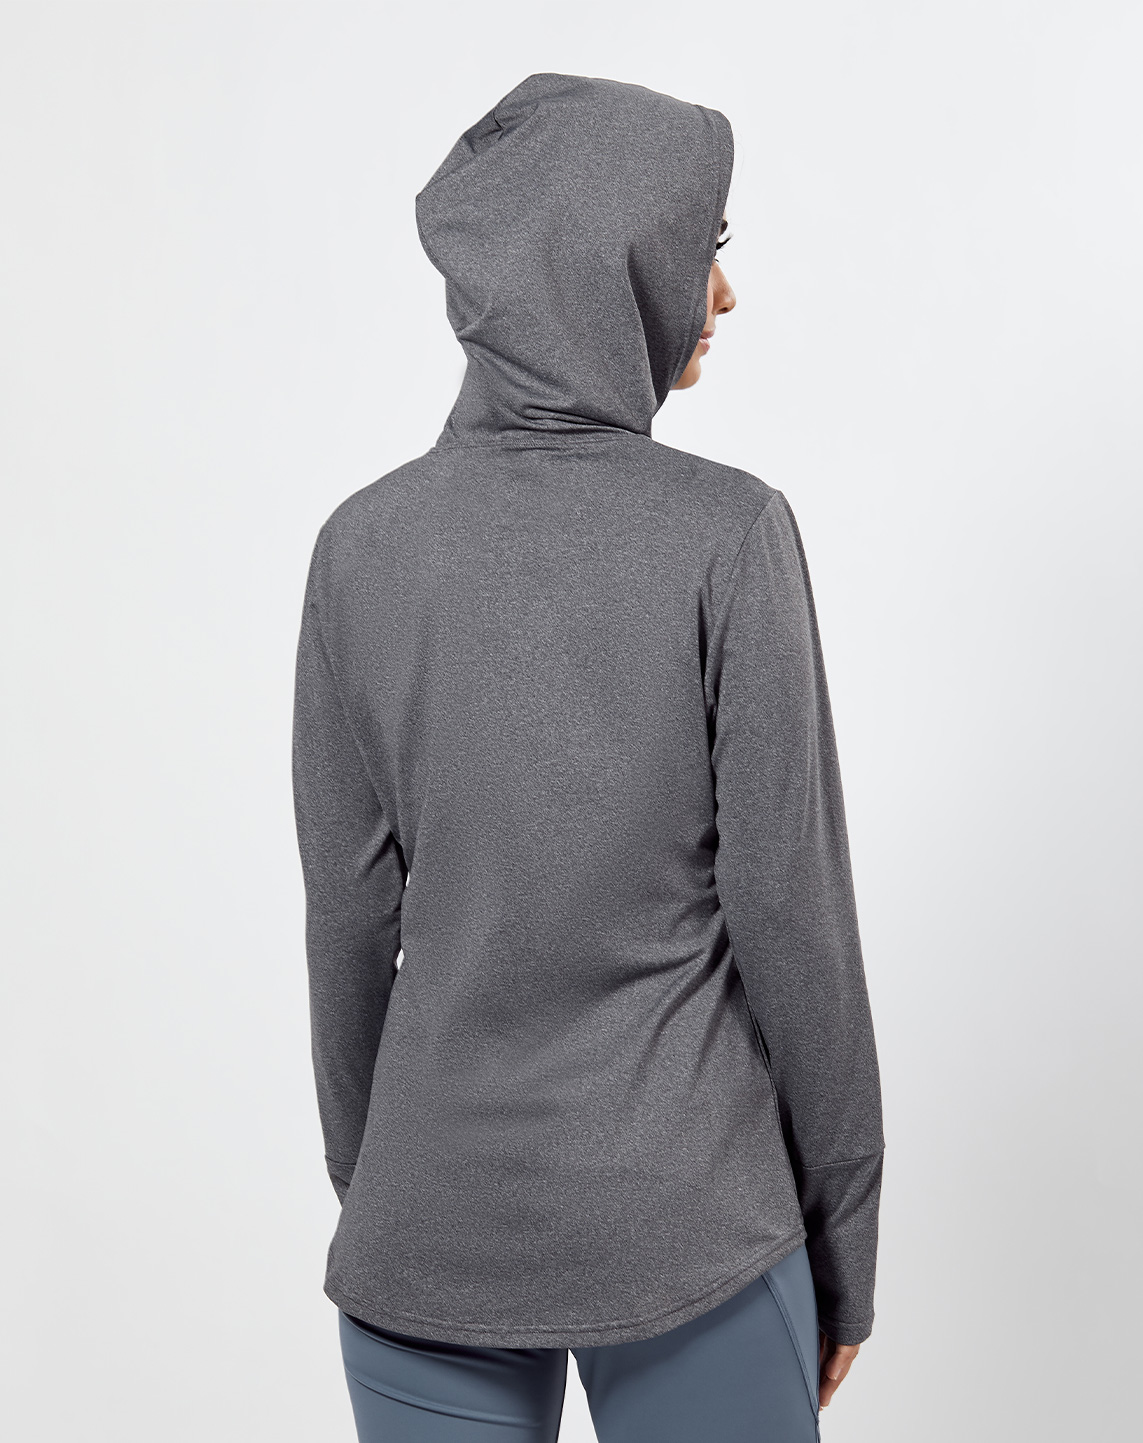 AGILE FITTED HOODIE (SHORT VERSION)